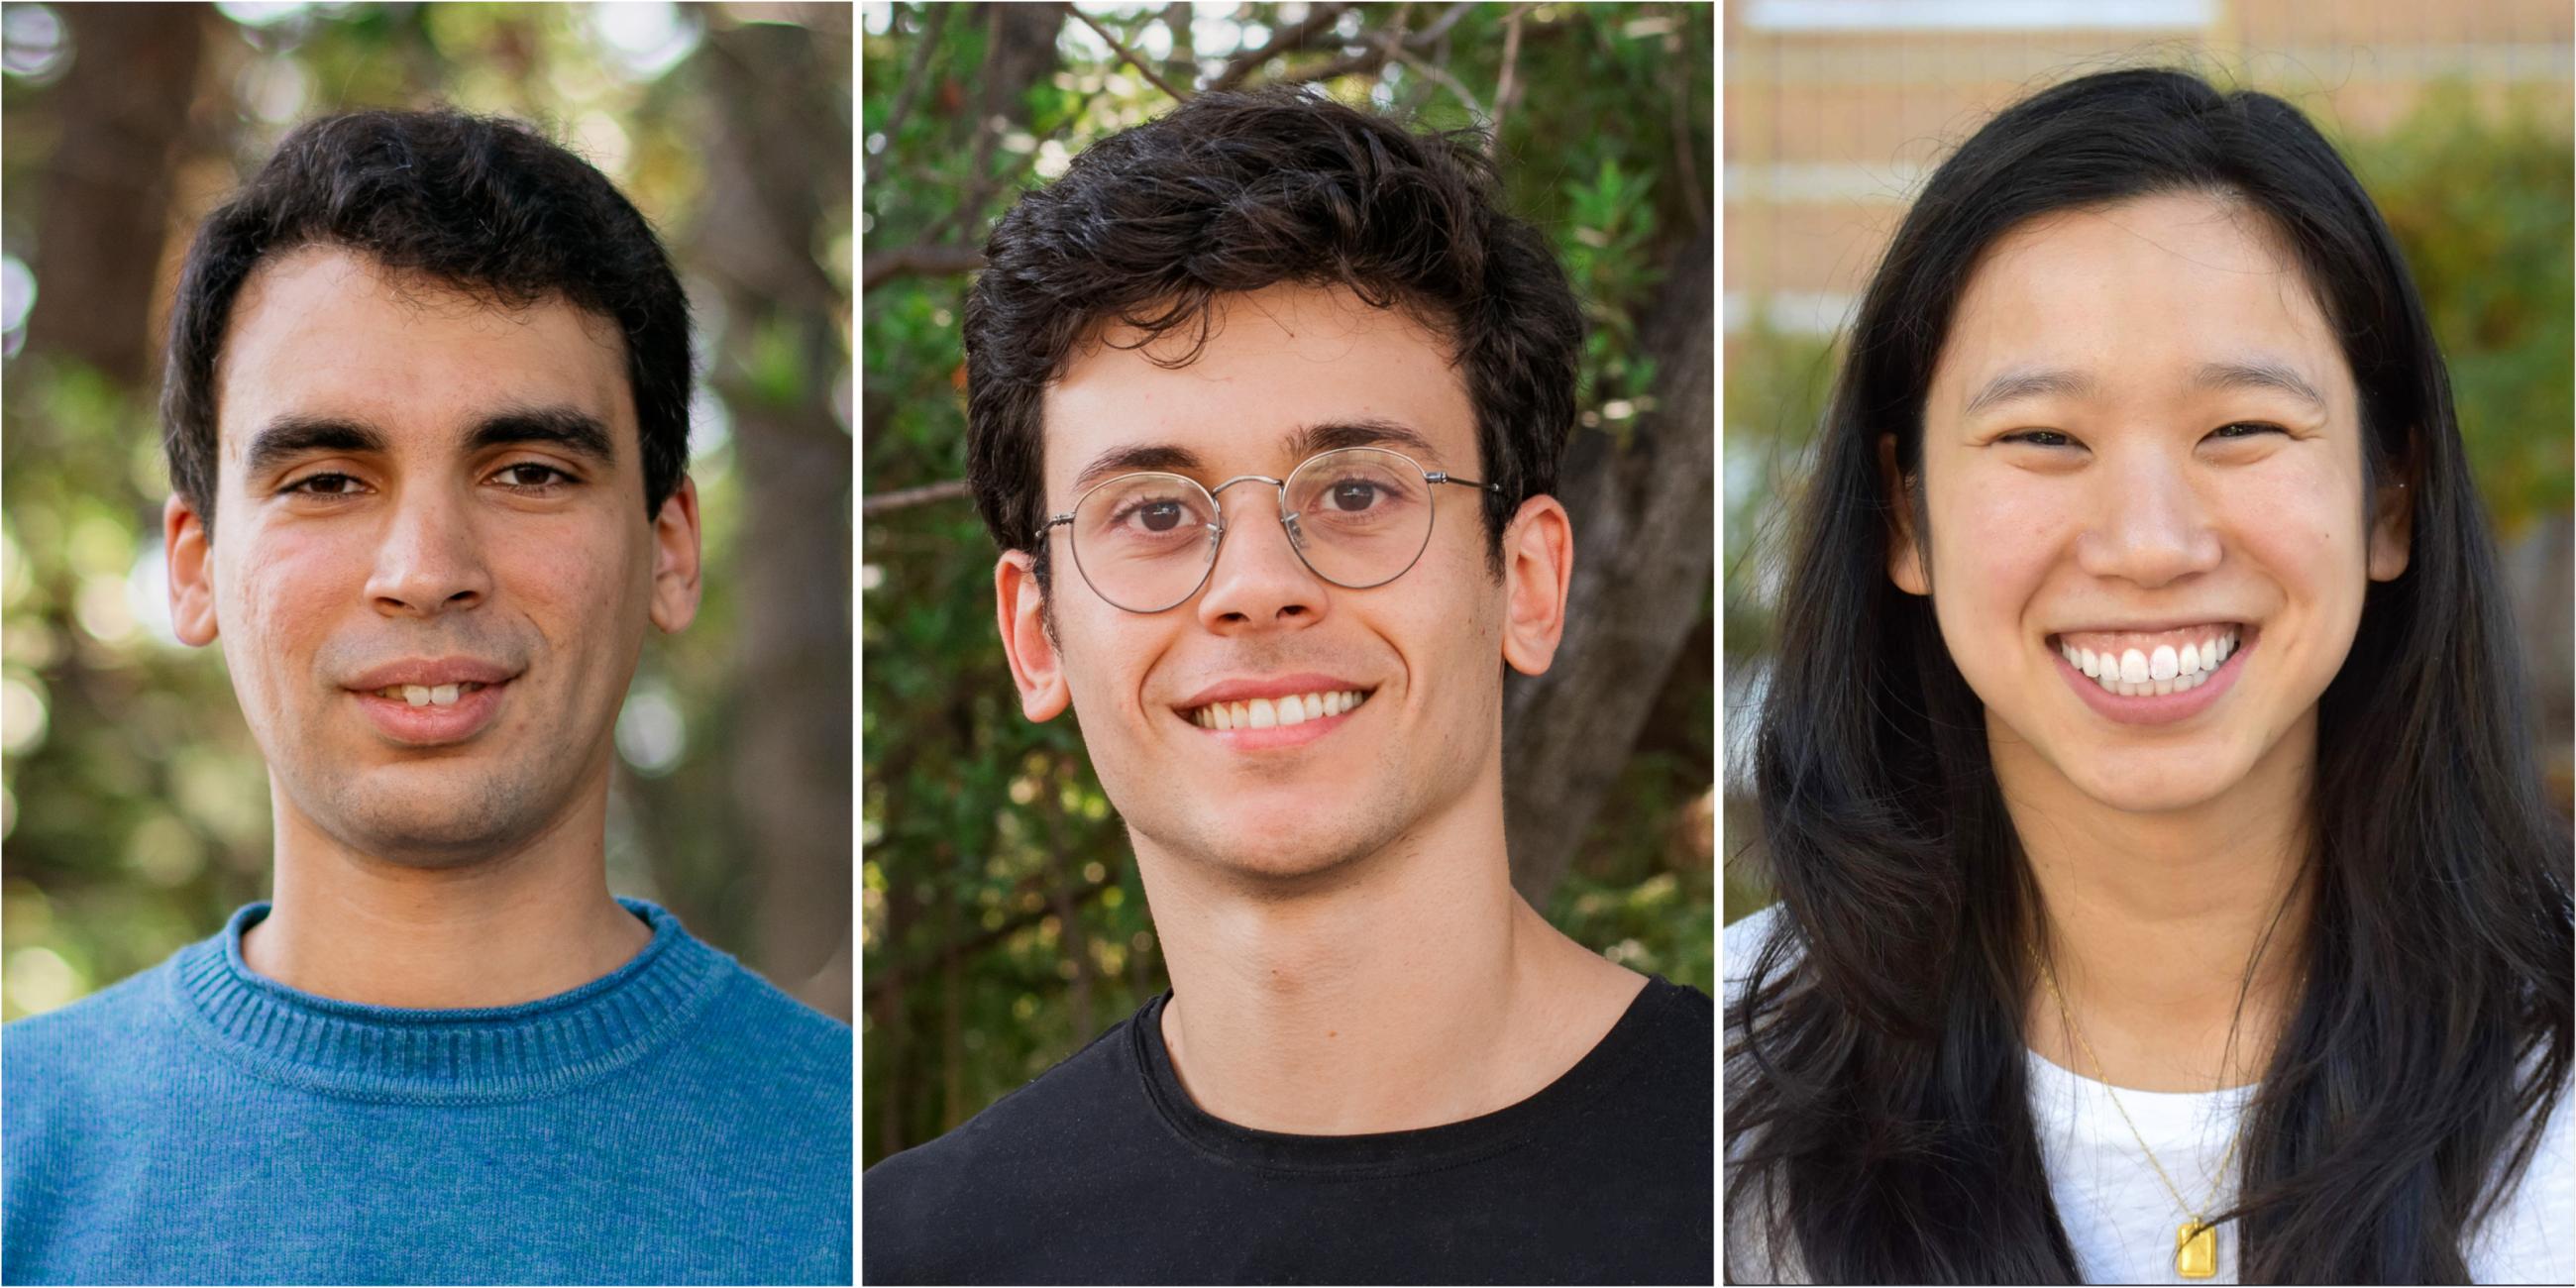 Ahmed Alaa (left) and Adam Yala (center) joined CPH this summer, and Irene Chen (right) will join in July 2023. (Photo/ Michelle Tran/Berkeley Computing, Data Science, and Society; Monica Agrawal)